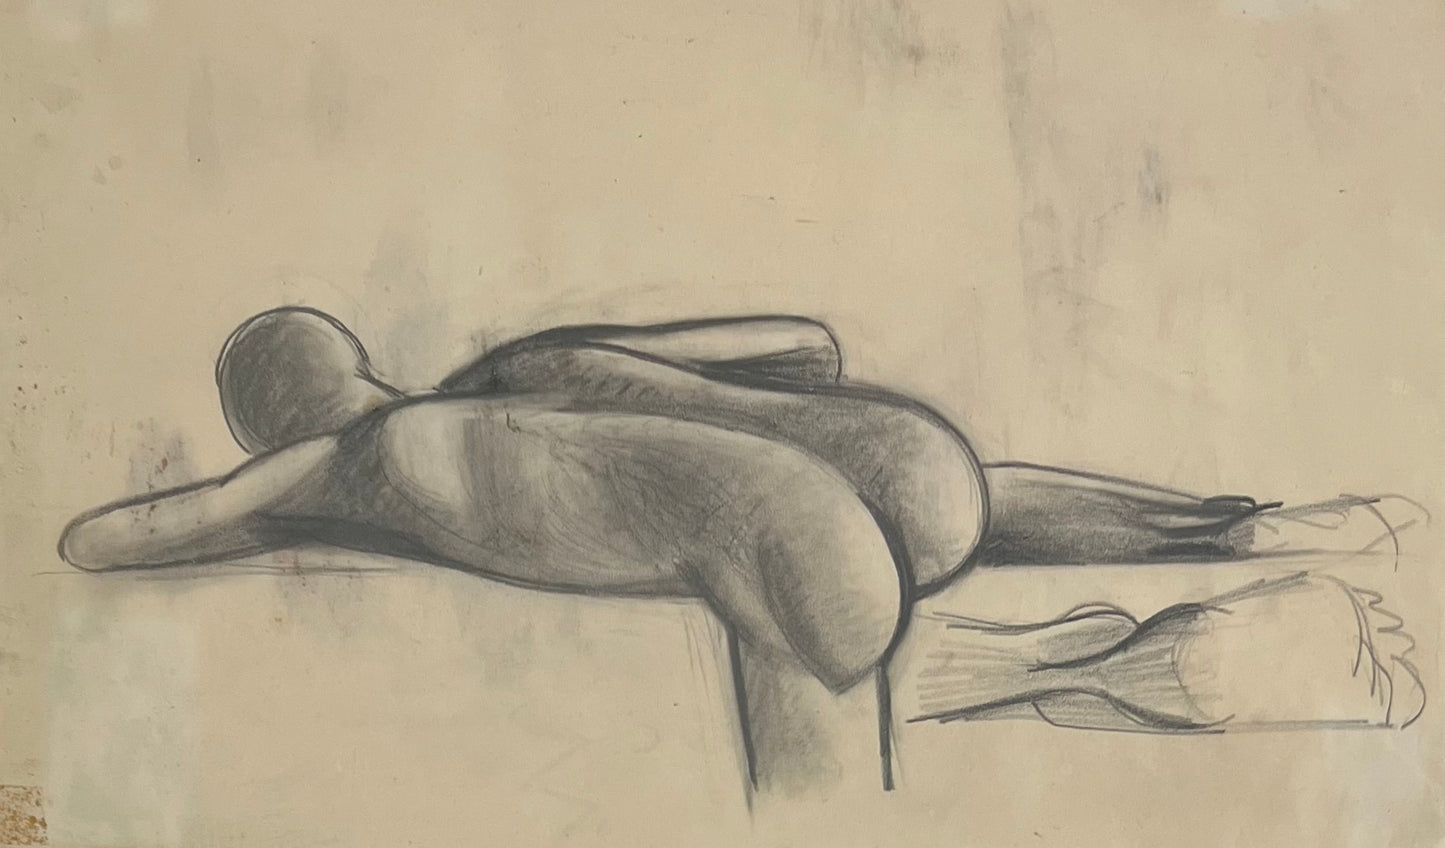 Vilhelm Lundstrom. Sketch for Mosaics in Frederiksberg Swimming Pool, approx. 1935.